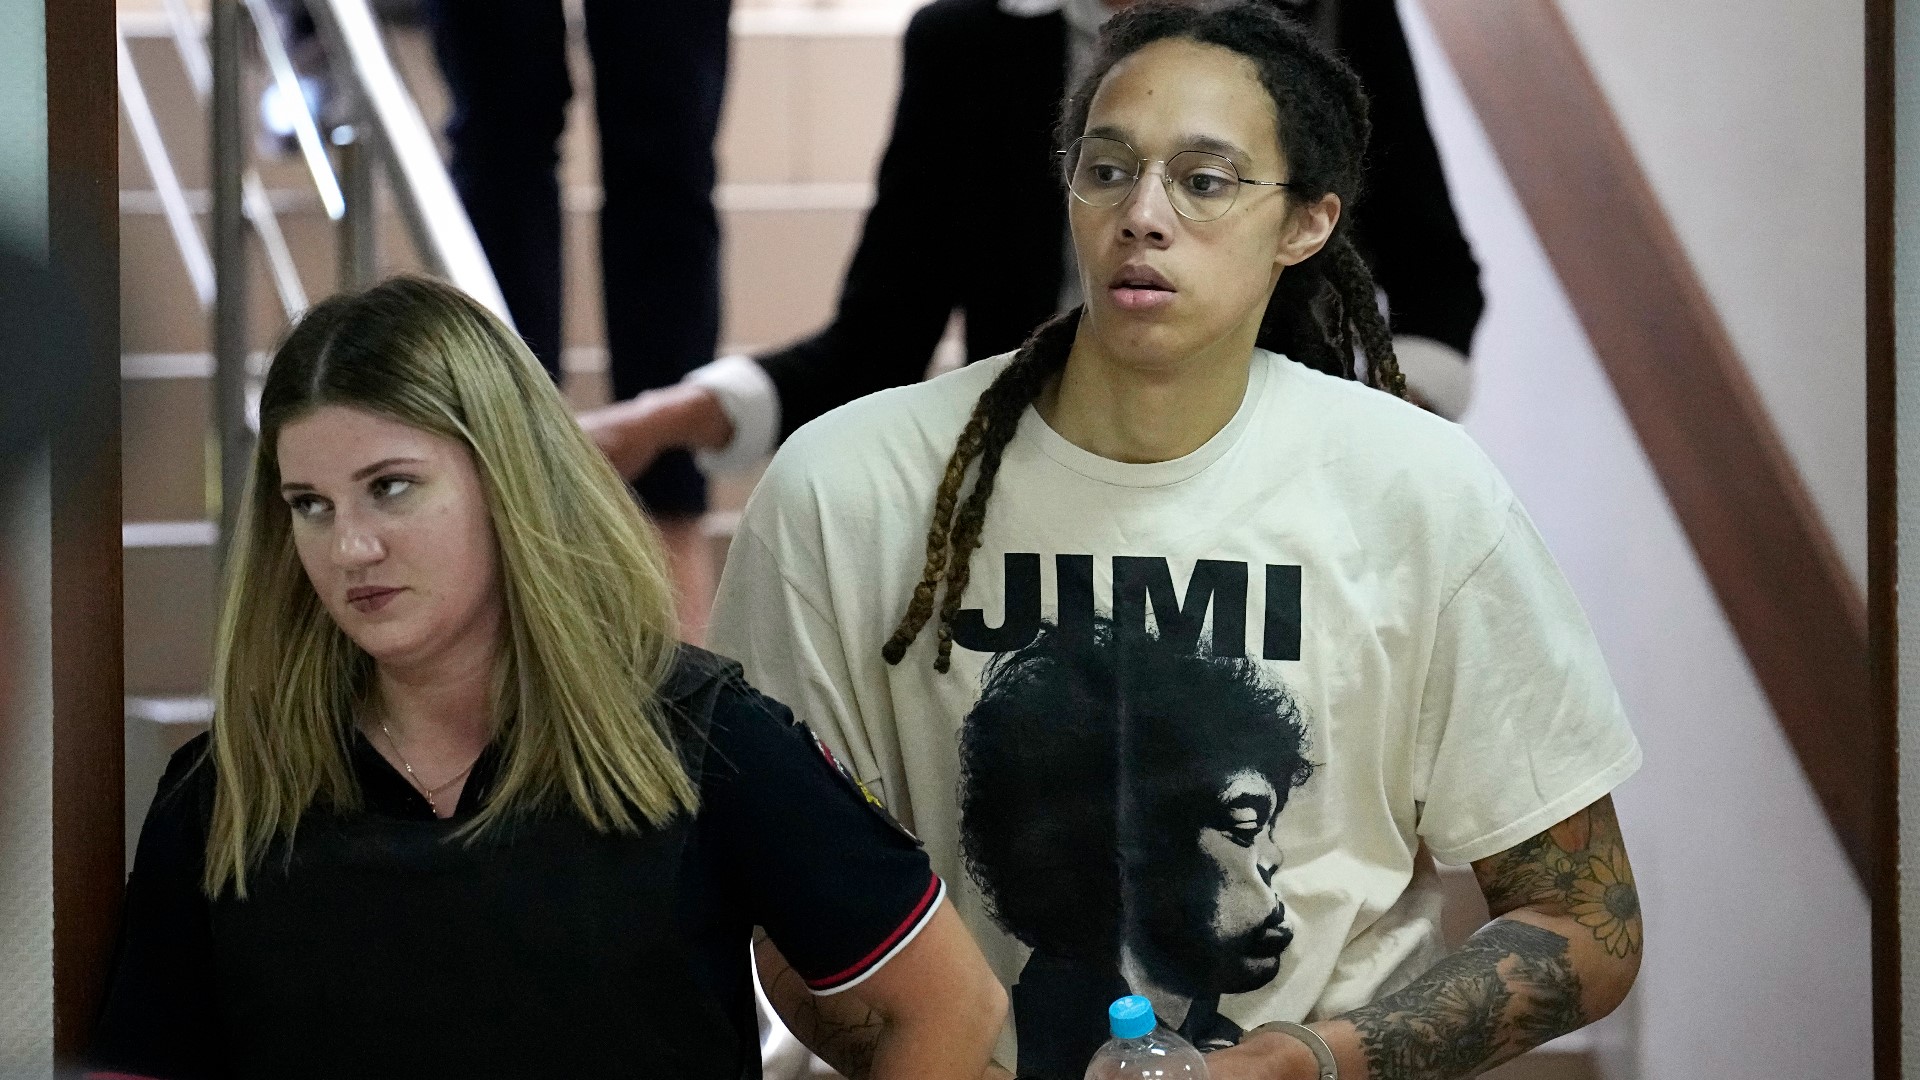 The Phoenix Mercury star and Houston native was also ordered to remain in custody for the duration of her criminal trial.